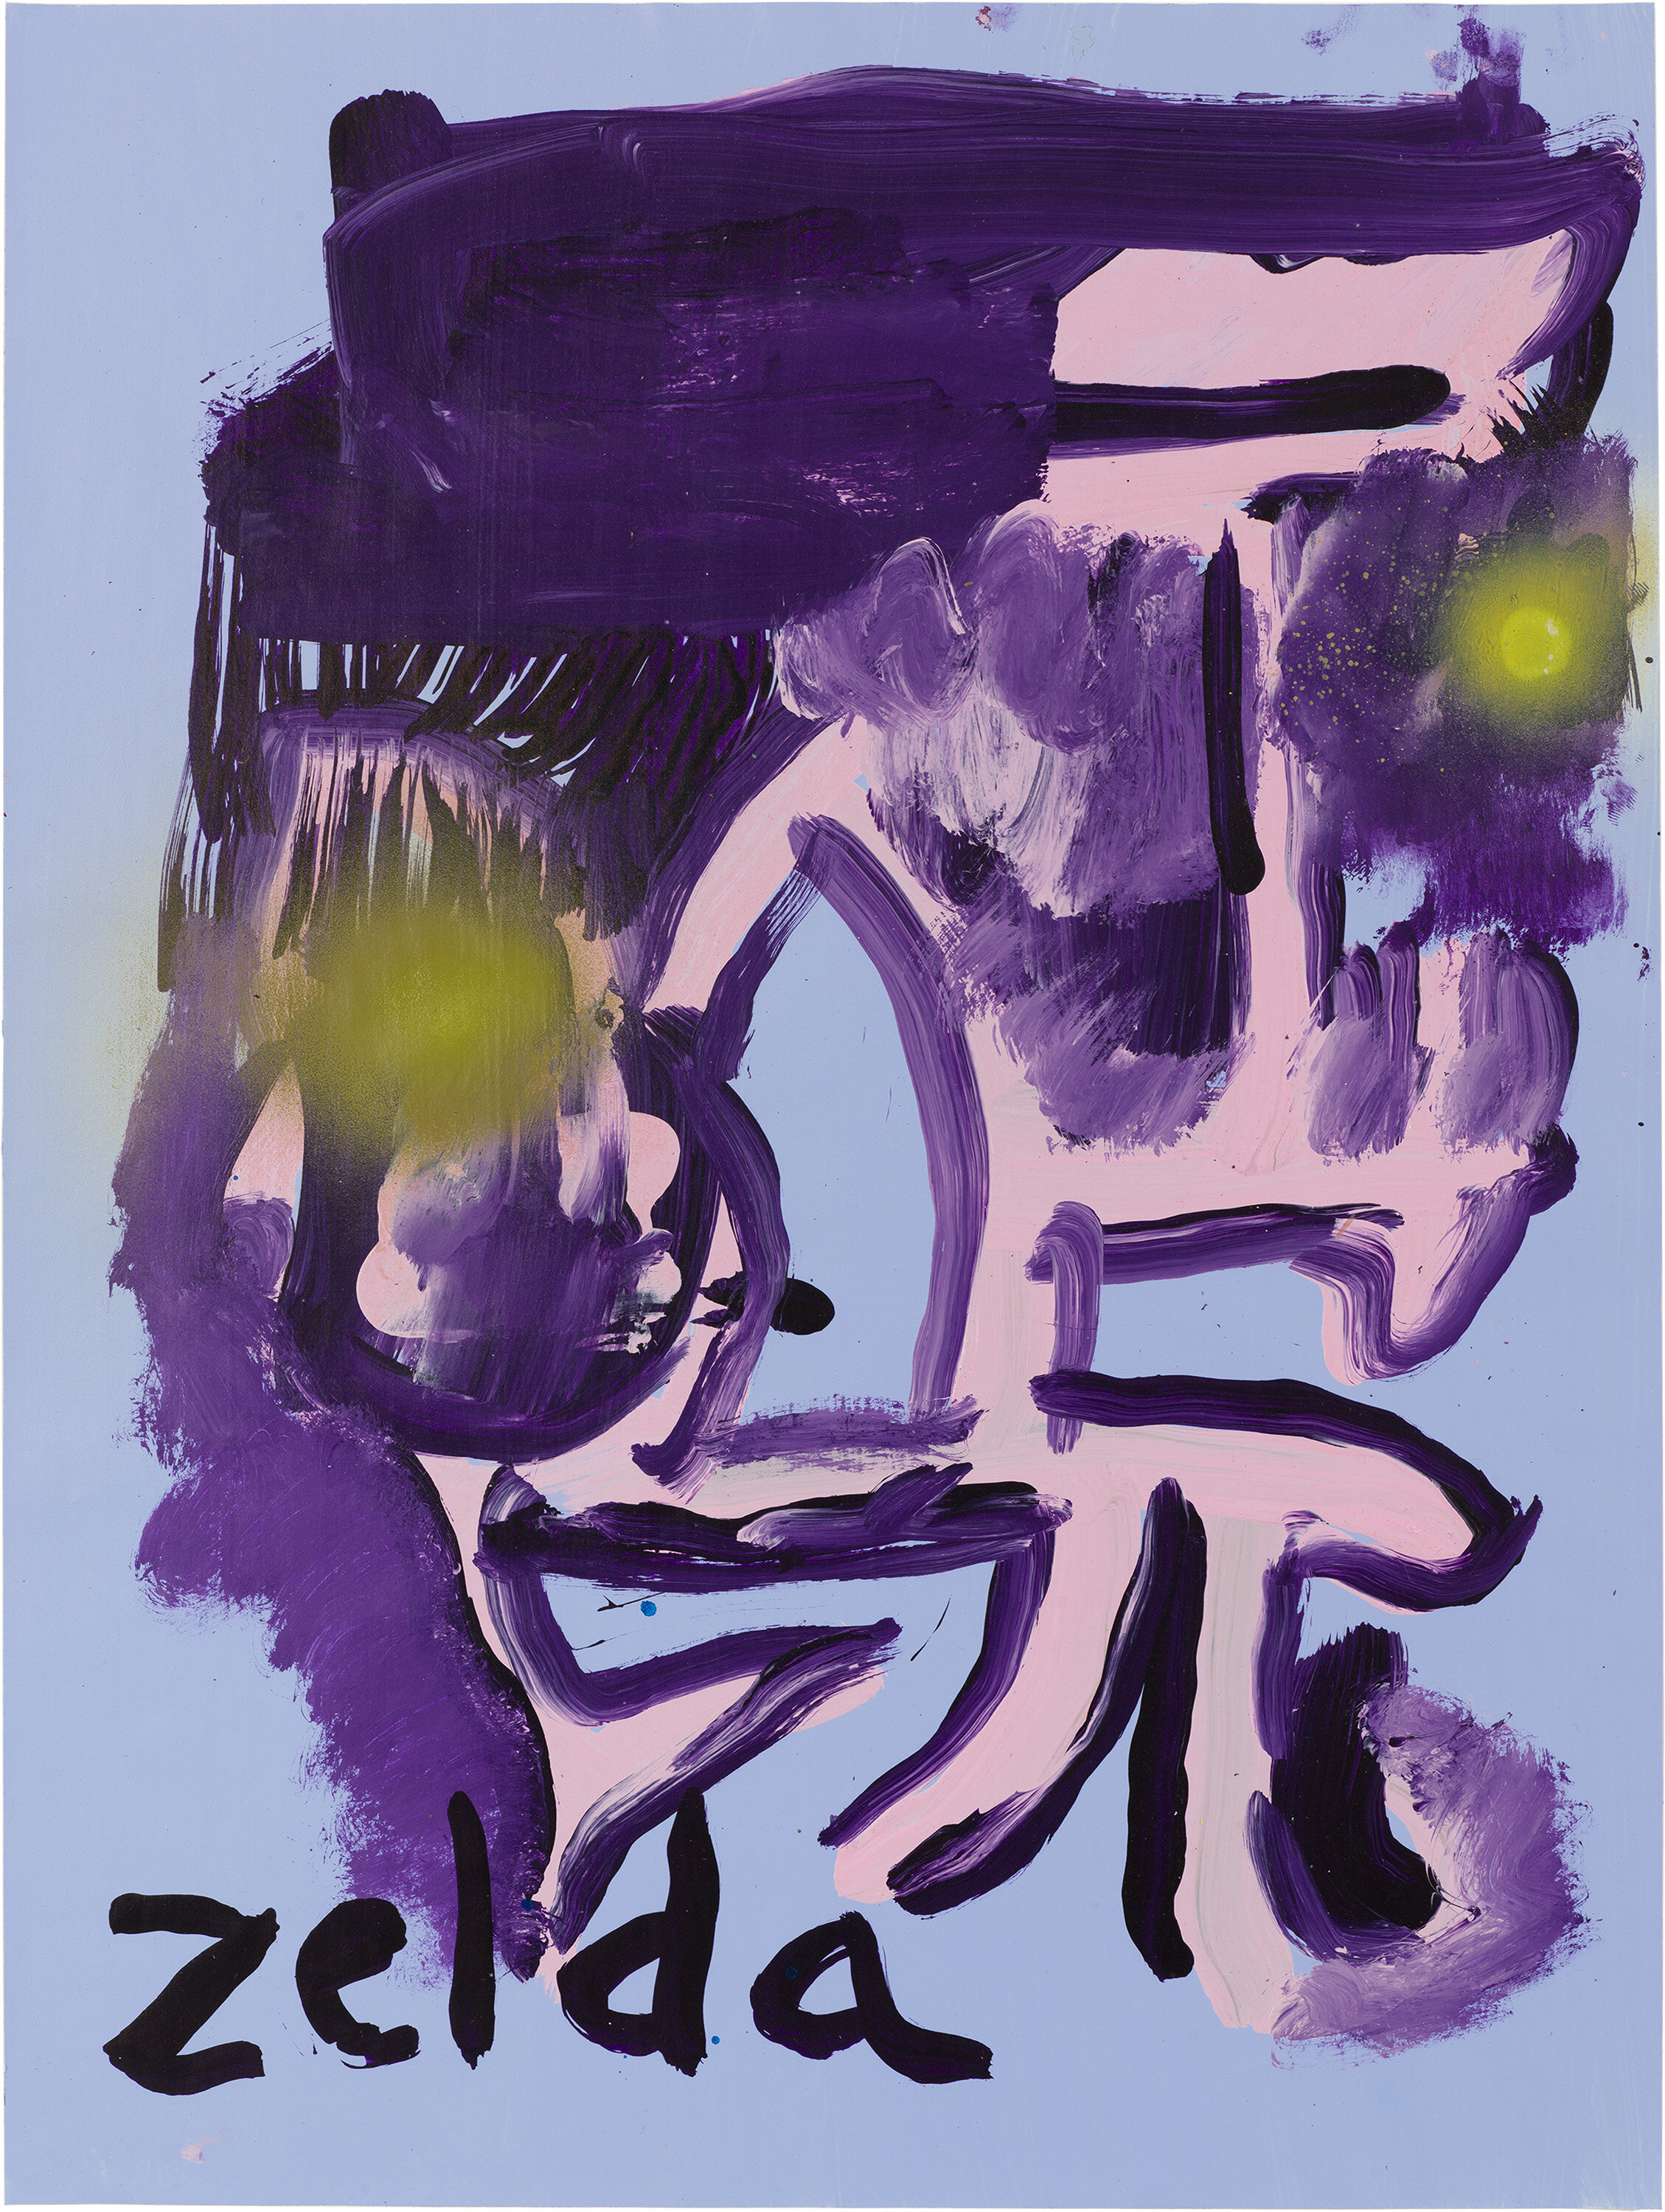  Drew Beattie and Ben Shepard   DBBS-DRW-2015-510   2015  acrylic and spray paint on paper  24 x 18 inches 